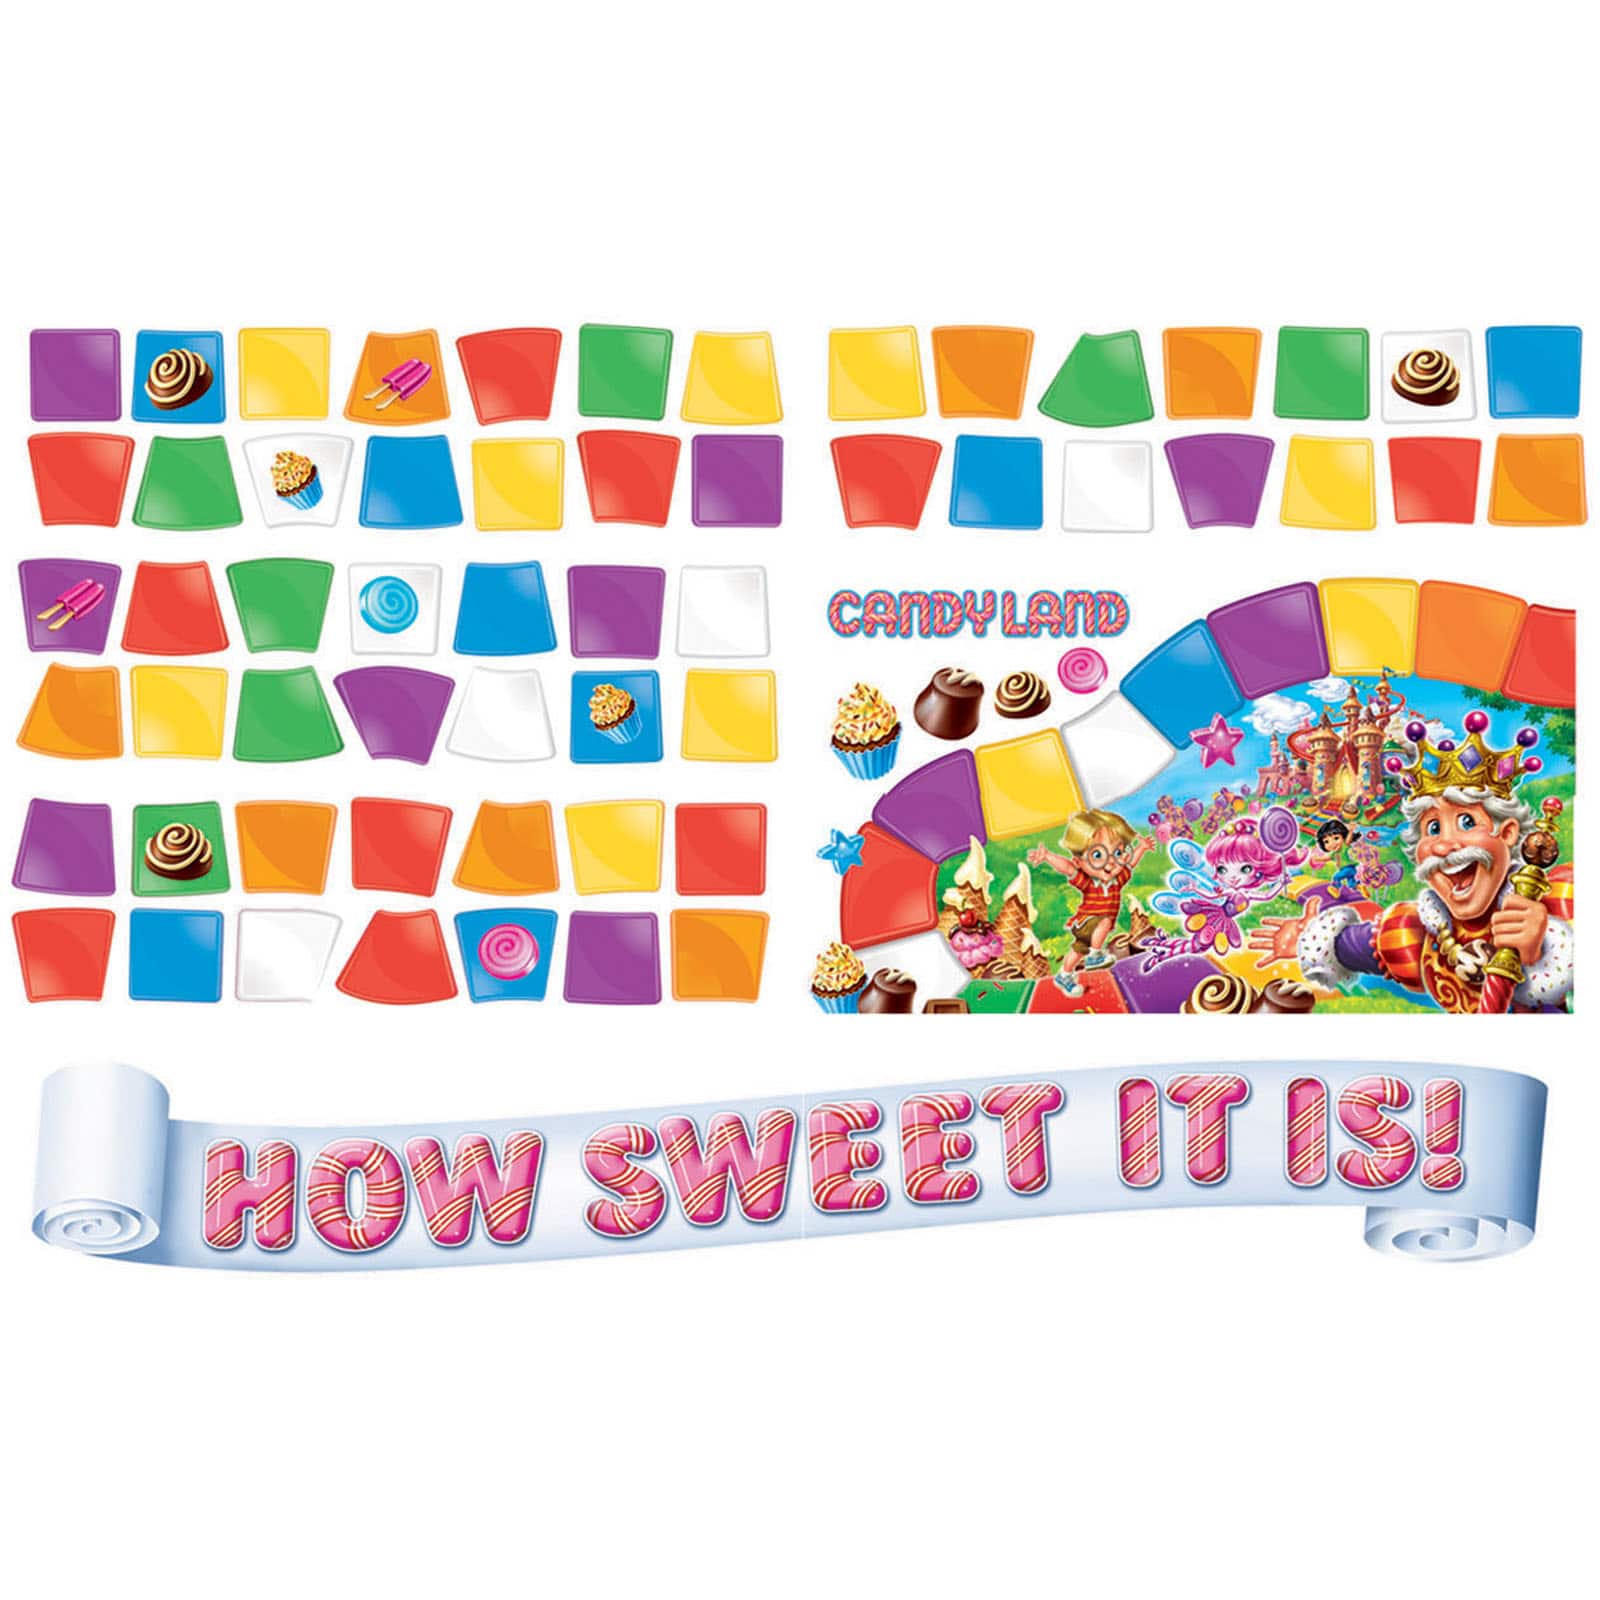 new candy land board